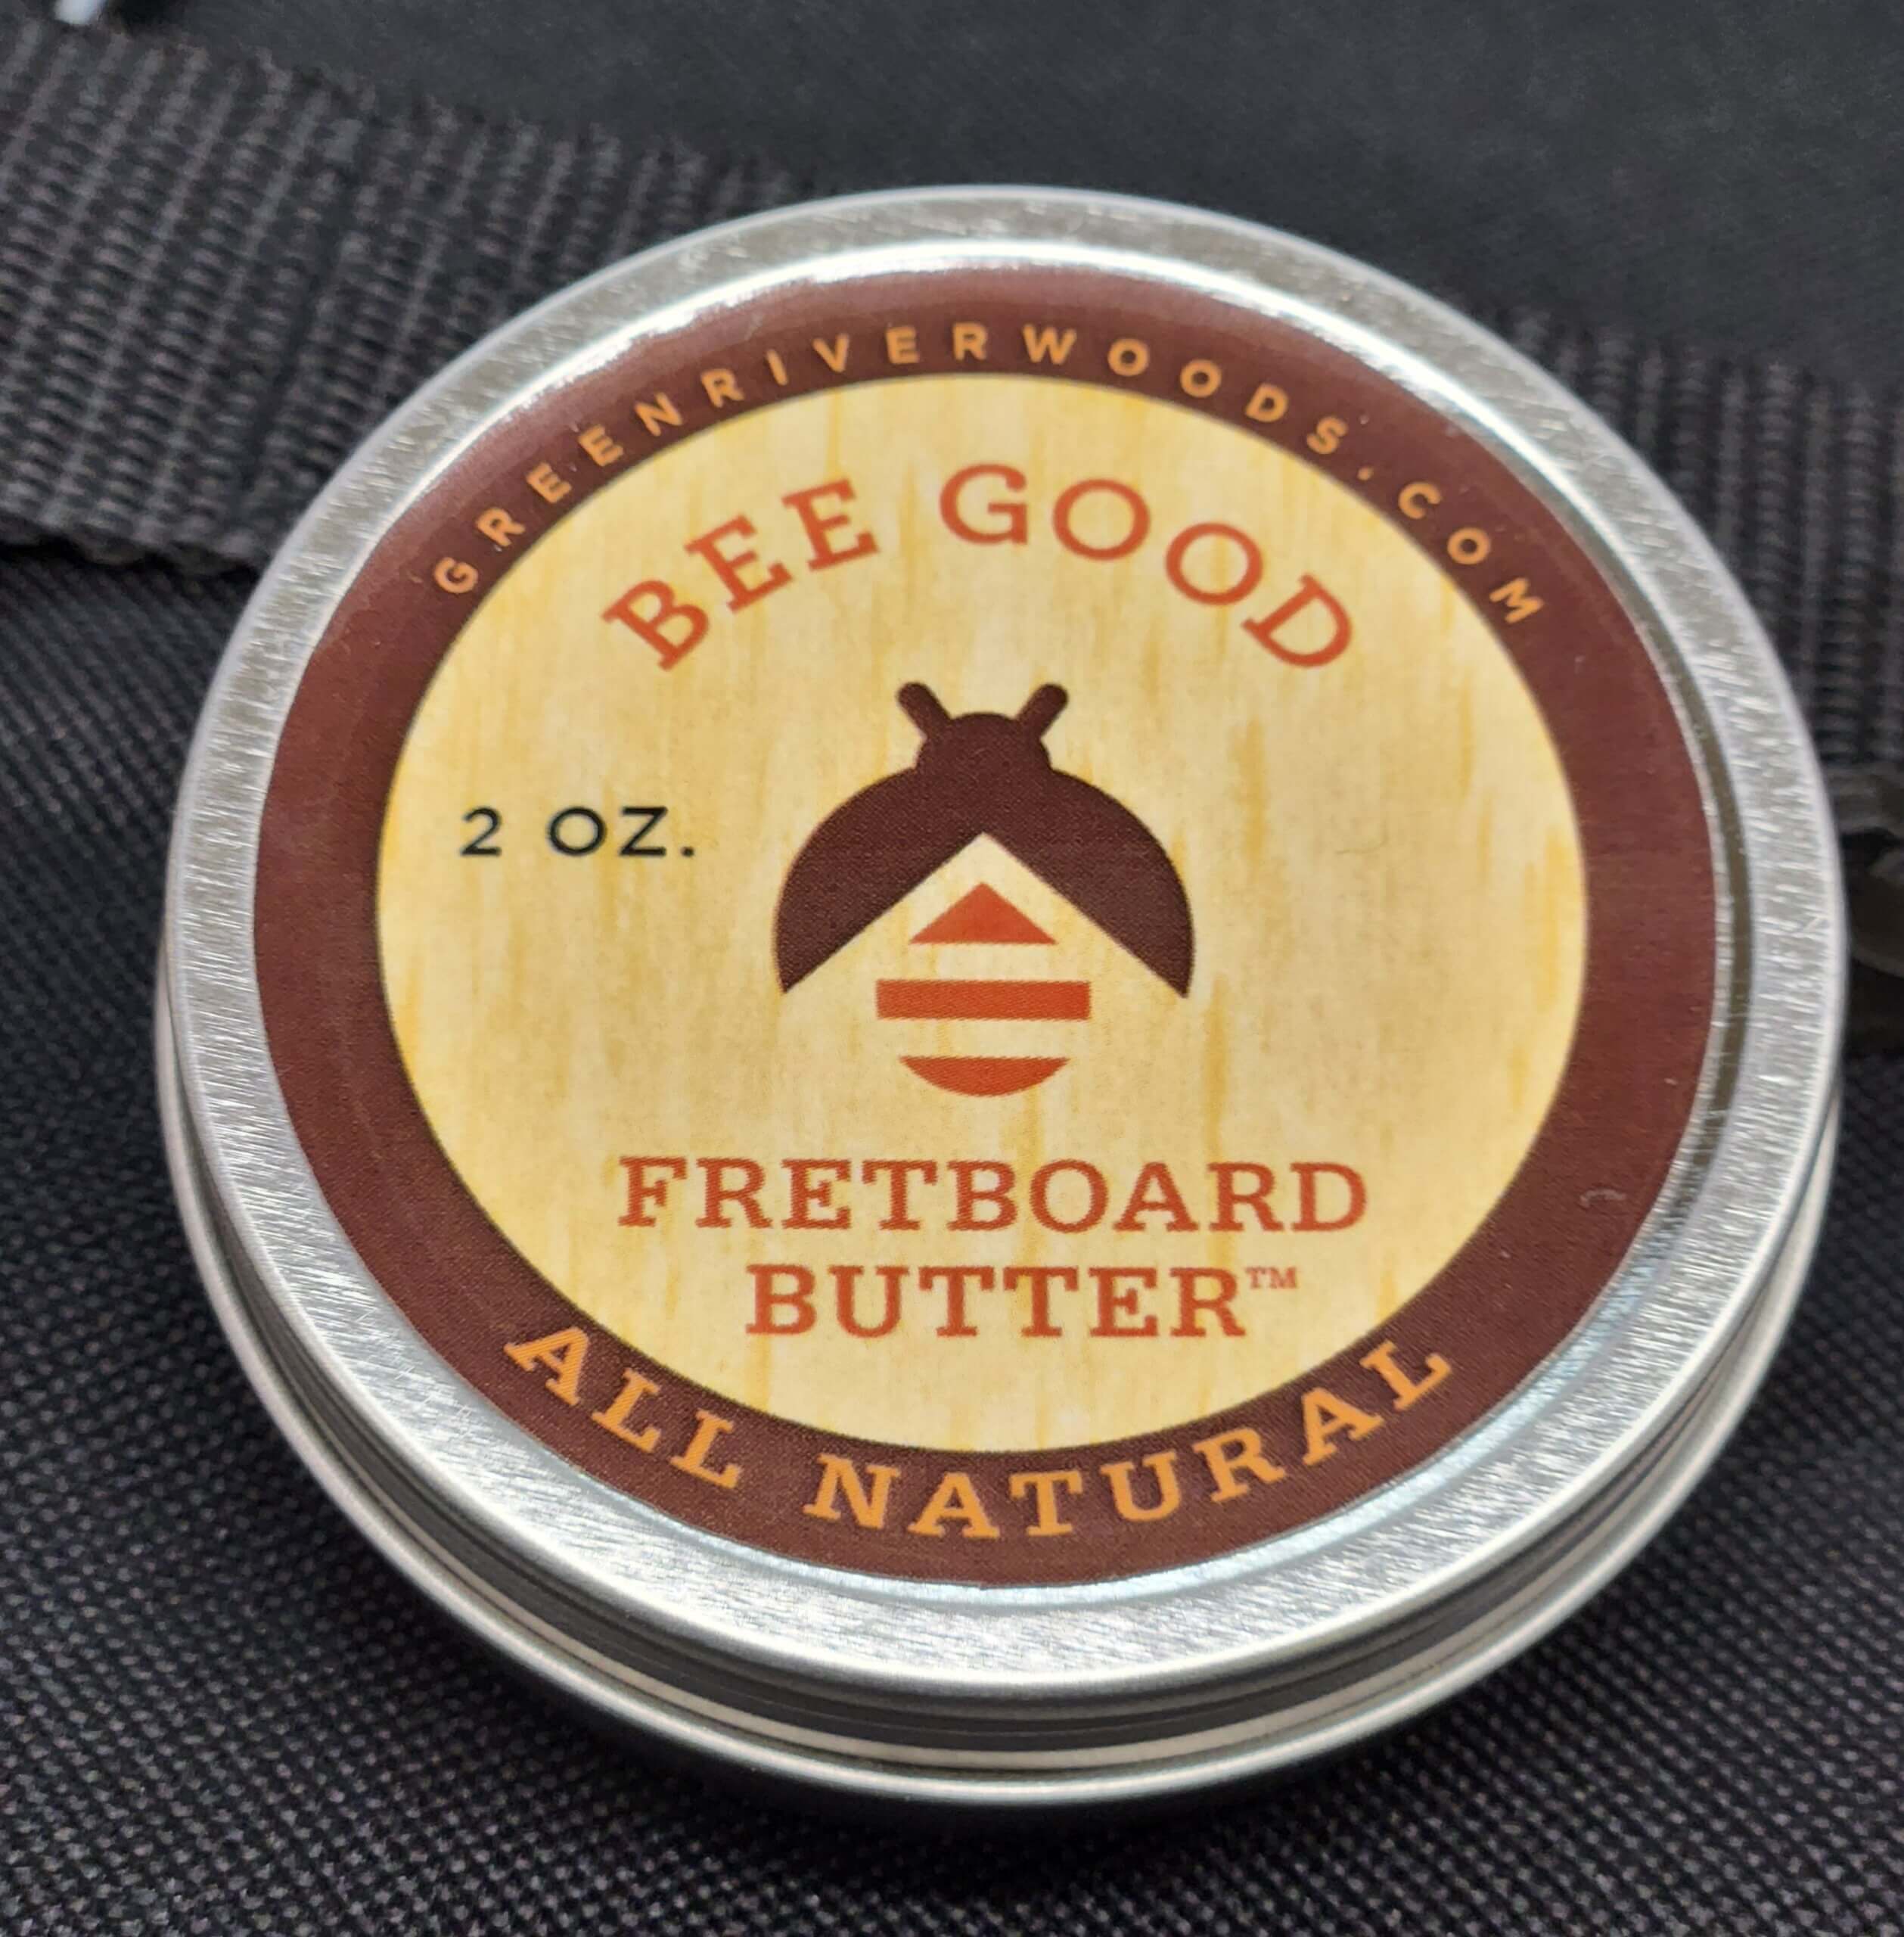 Bee Good All Natural Fretboard Oil